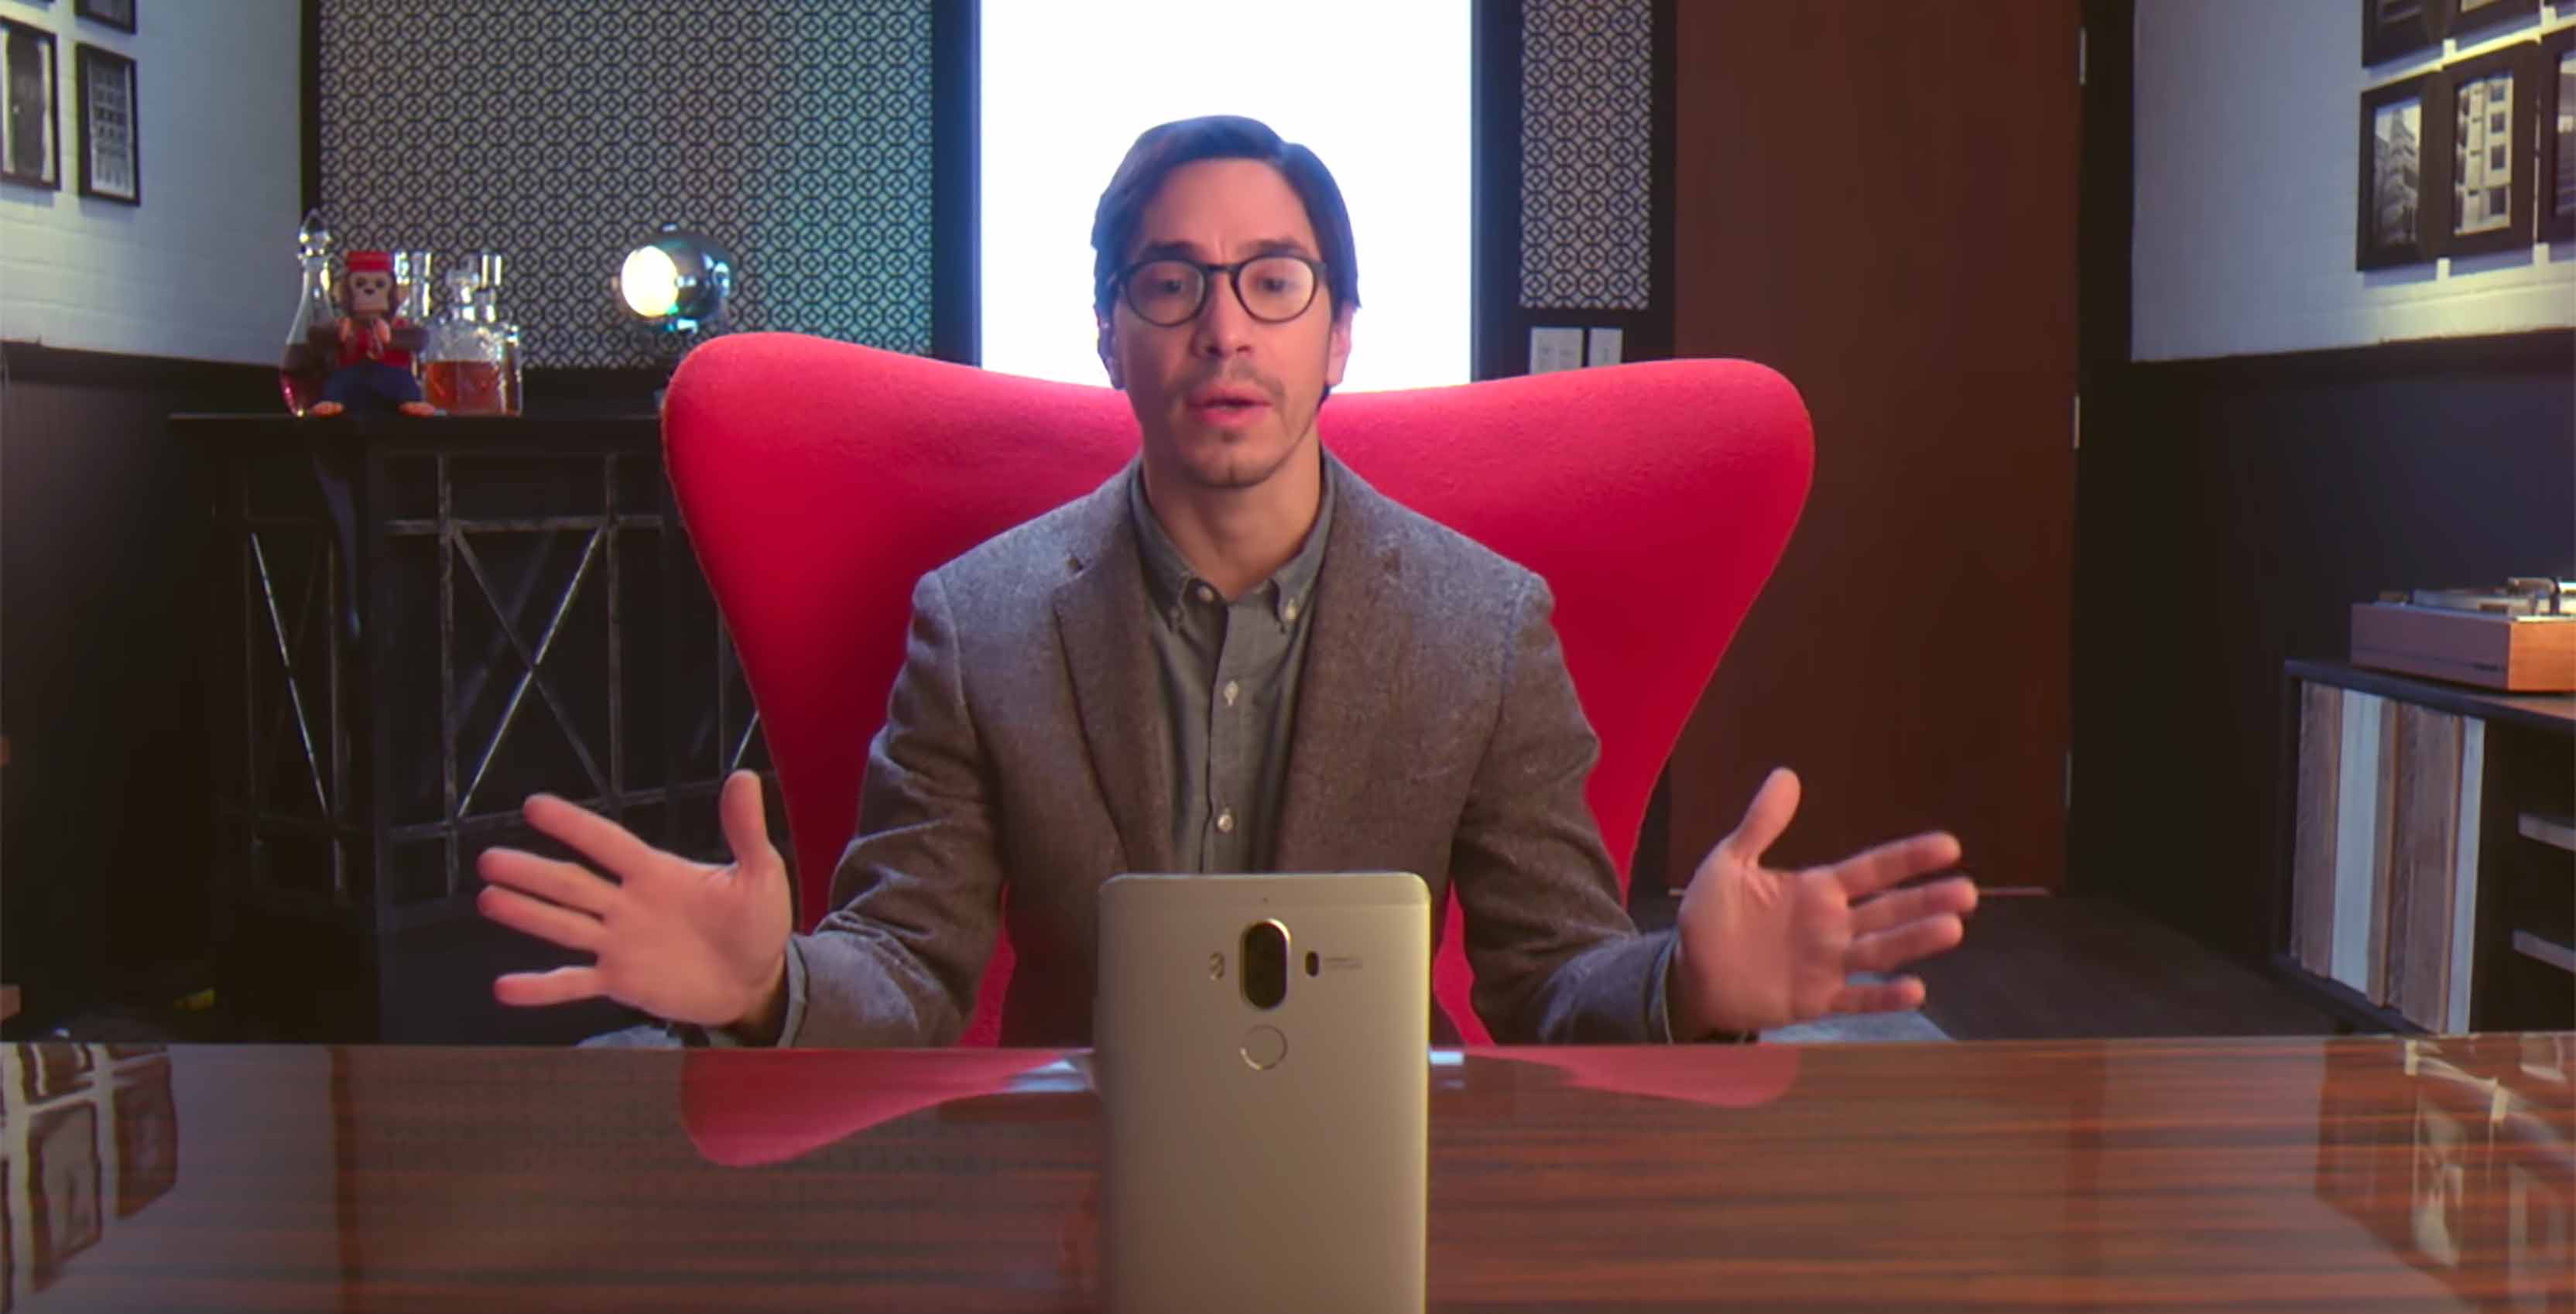 huawei mate 9 justin long commercial